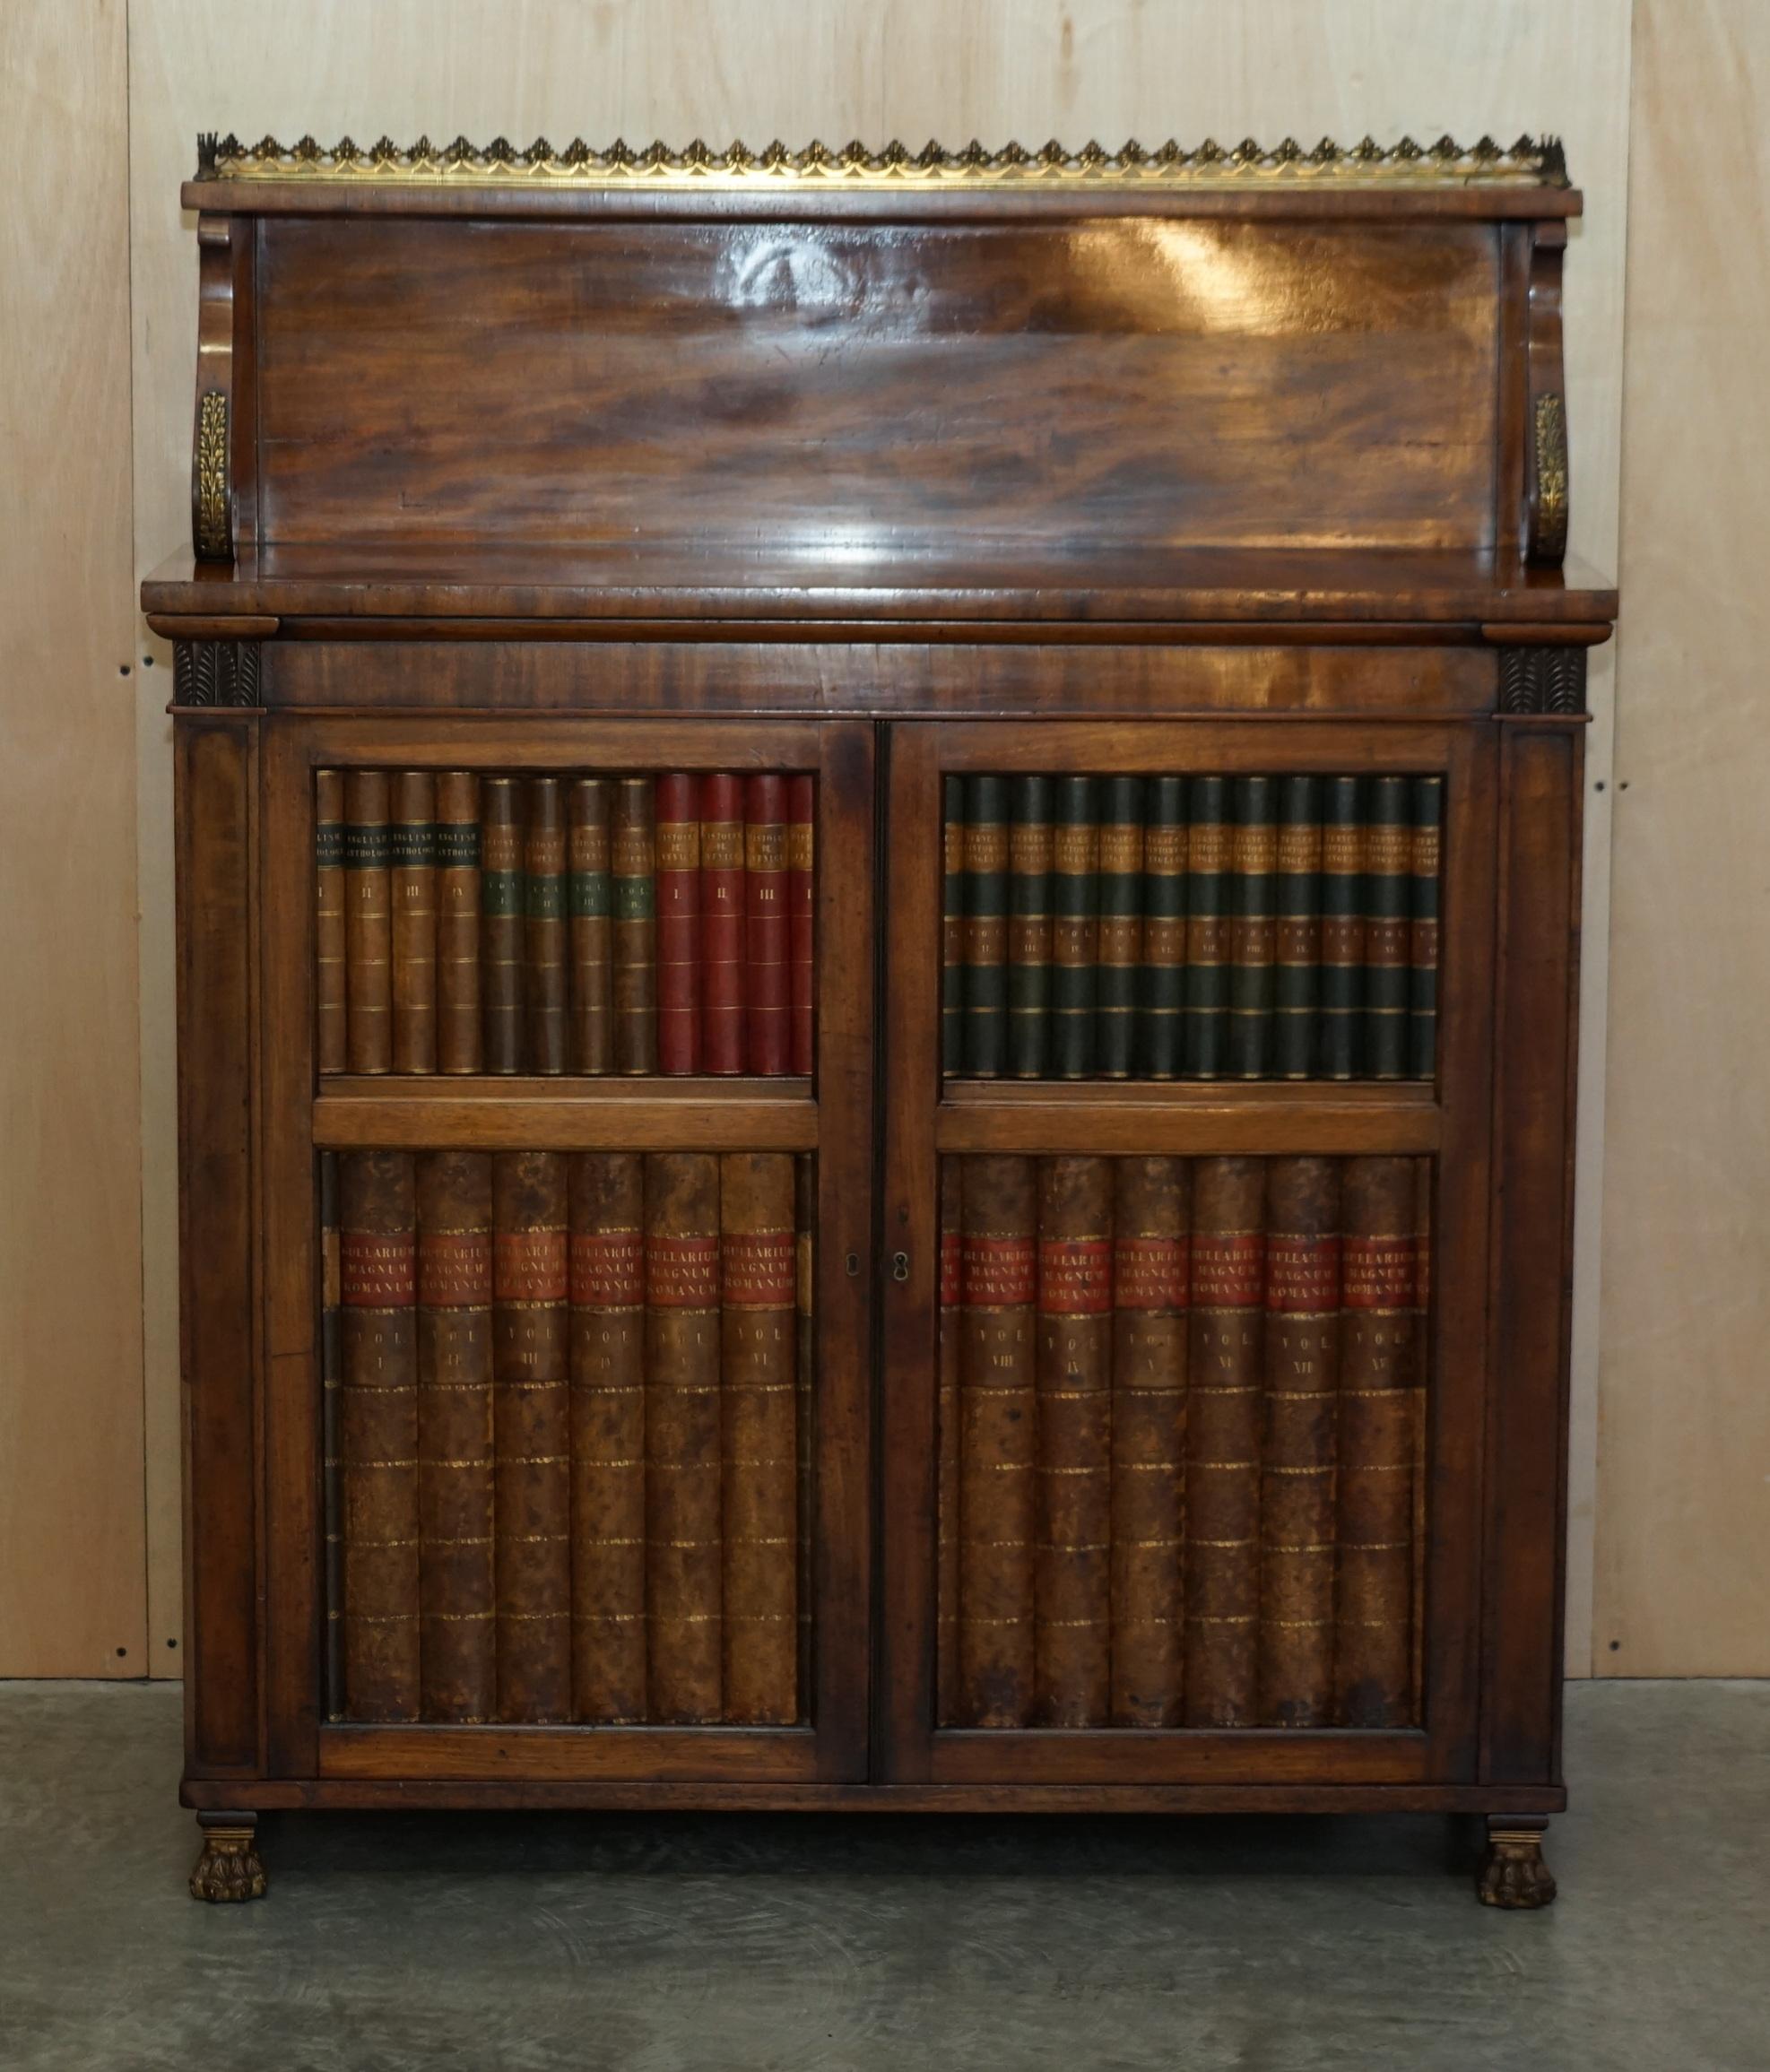 Royal House Antiques

Royal House Antiques is delighted to offer for sale this stunning original circa 1815 Regency Mahogany Brass and Leather chiffonier sideboard with gallery rail and faux book front

Please note the delivery fee listed is just a